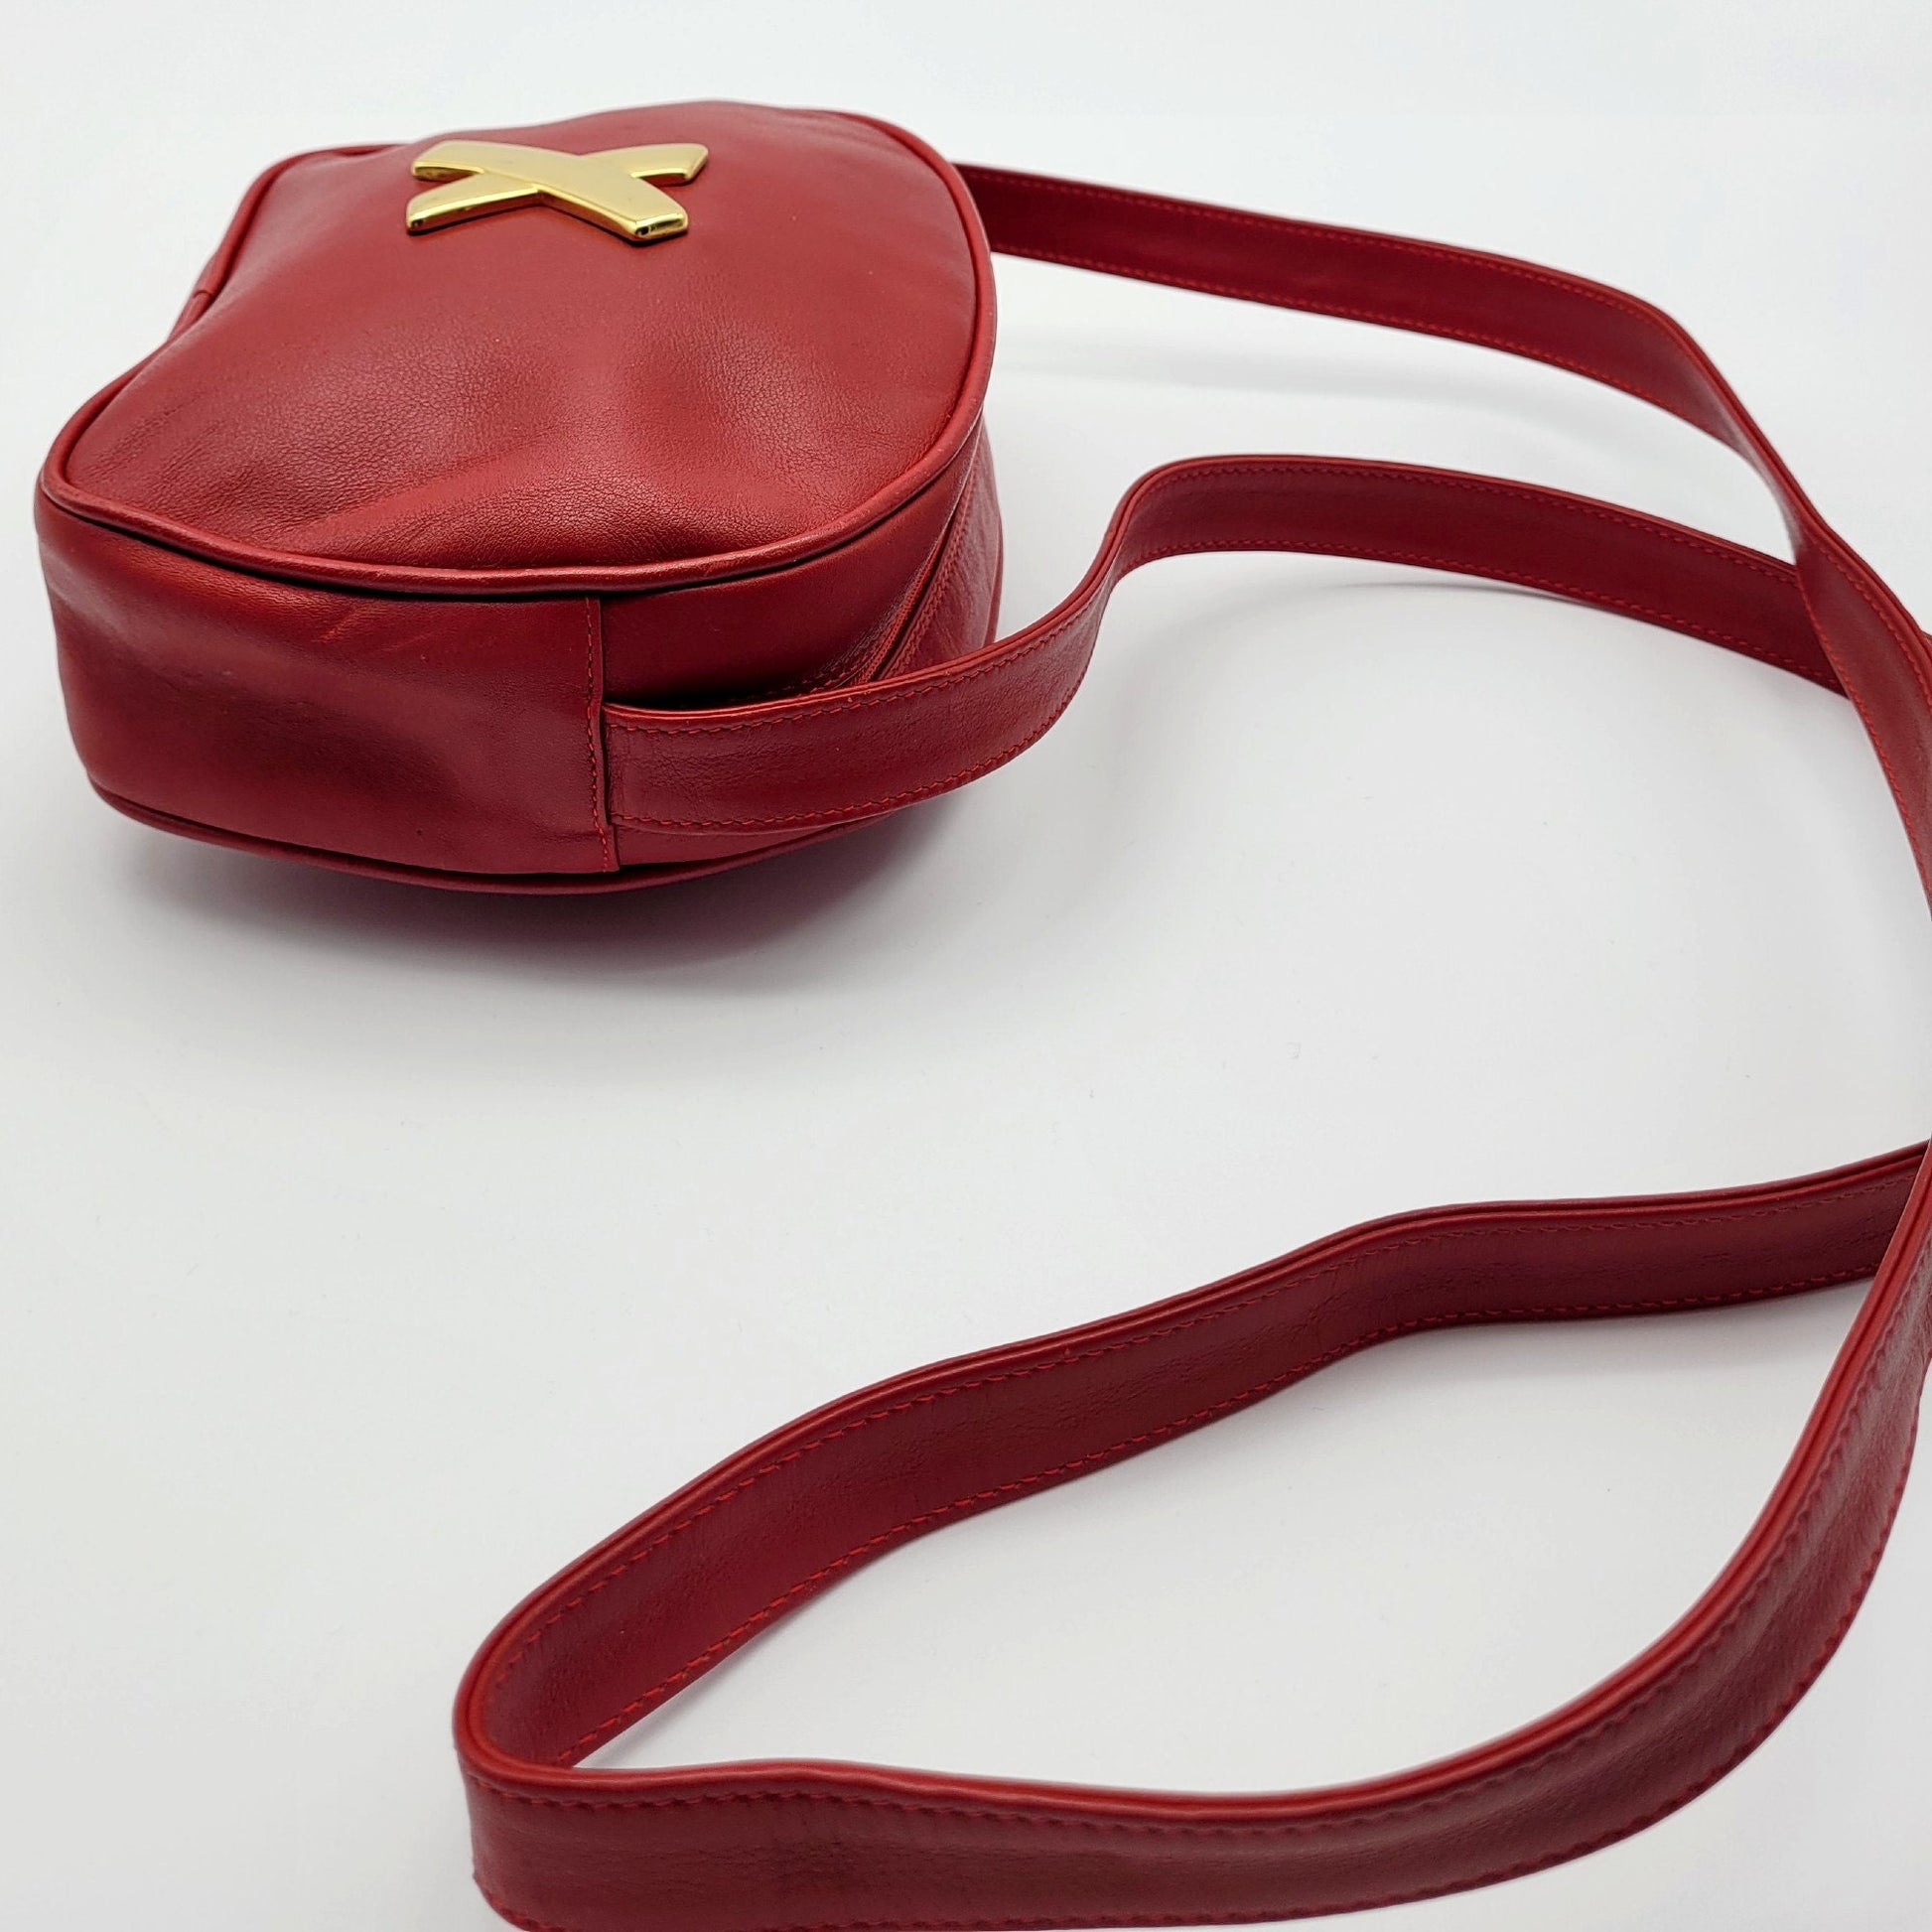 Vintage Paloma Picasso red Crossbody Bag - Secondista